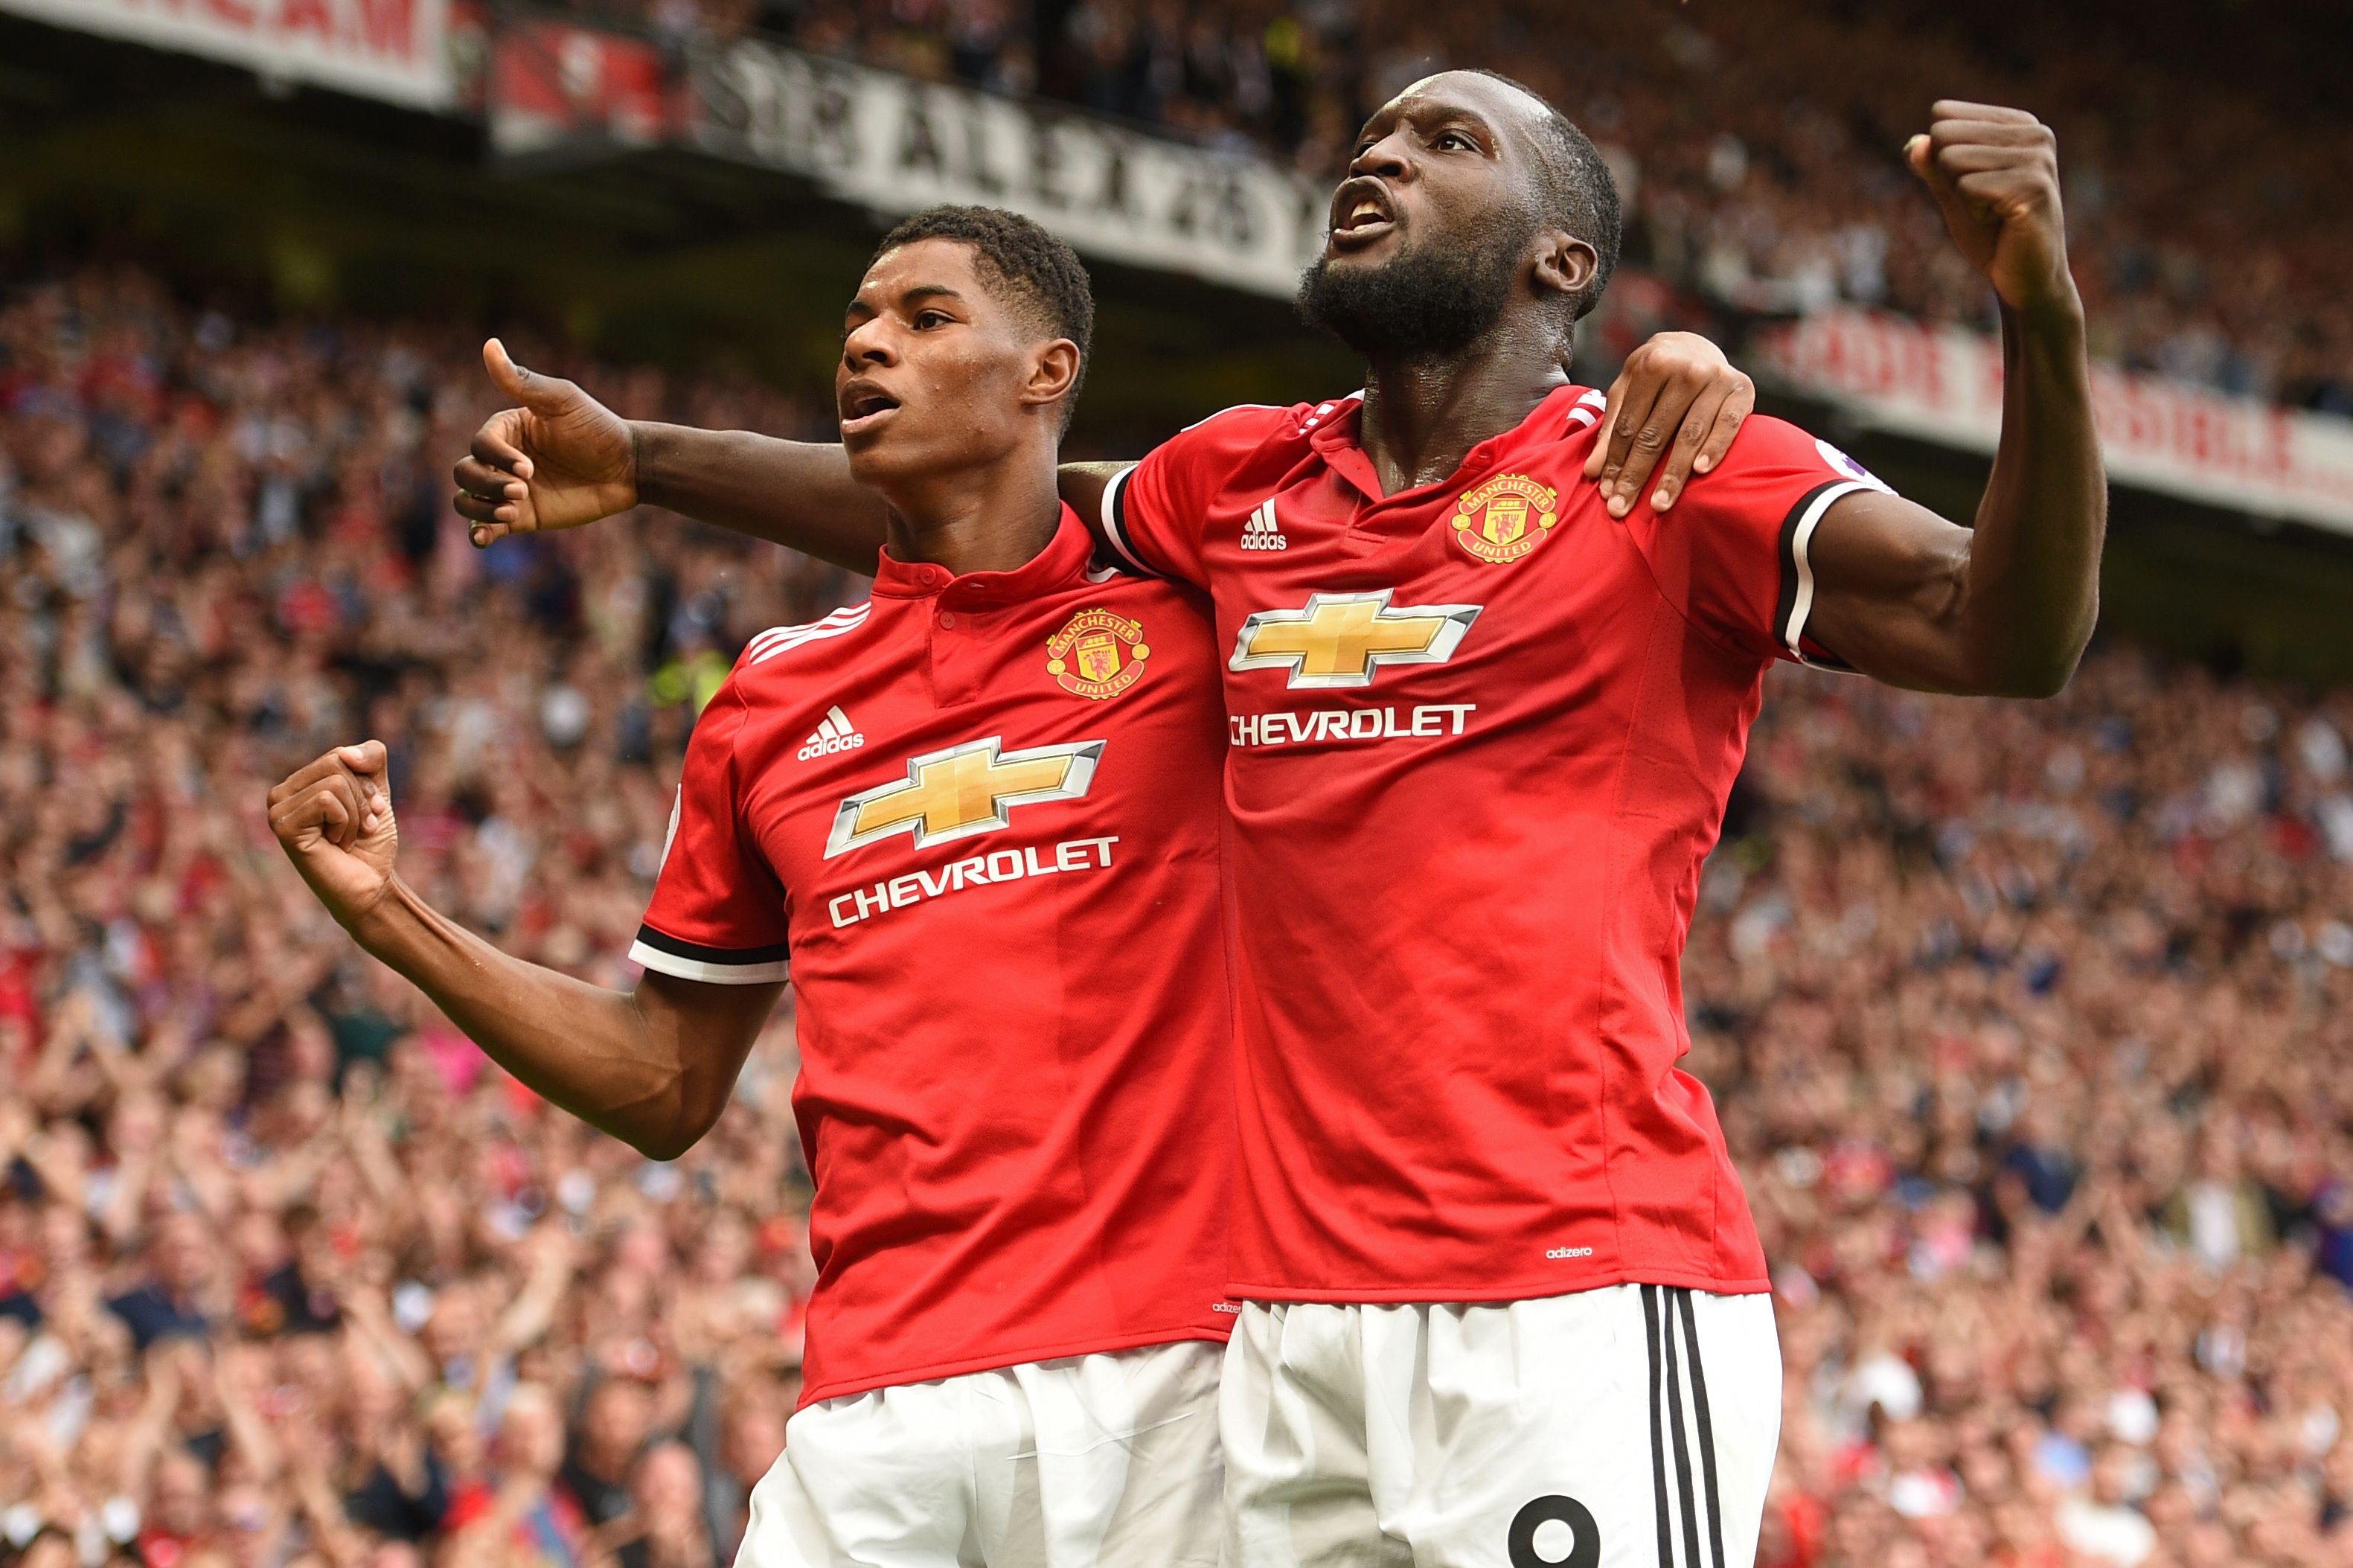 Manchester United's Belgian striker Romelu Lukaku celebrates scoring the opening goal with Manchester United's English striker Marcus Rashford during the English Premier League football match between Manchester United and West Ham United at Old Trafford in Manchester, north west England, on August 13, 2017. / AFP PHOTO / Oli SCARFF / RESTRICTED TO EDITORIAL USE. No use with unauthorized audio, video, data, fixture lists, club/league logos or 'live' services. Online in-match use limited to 75 images, no video emulation. No use in betting, games or single club/league/player publications.  /         (Photo credit should read OLI SCARFF/AFP/Getty Images)